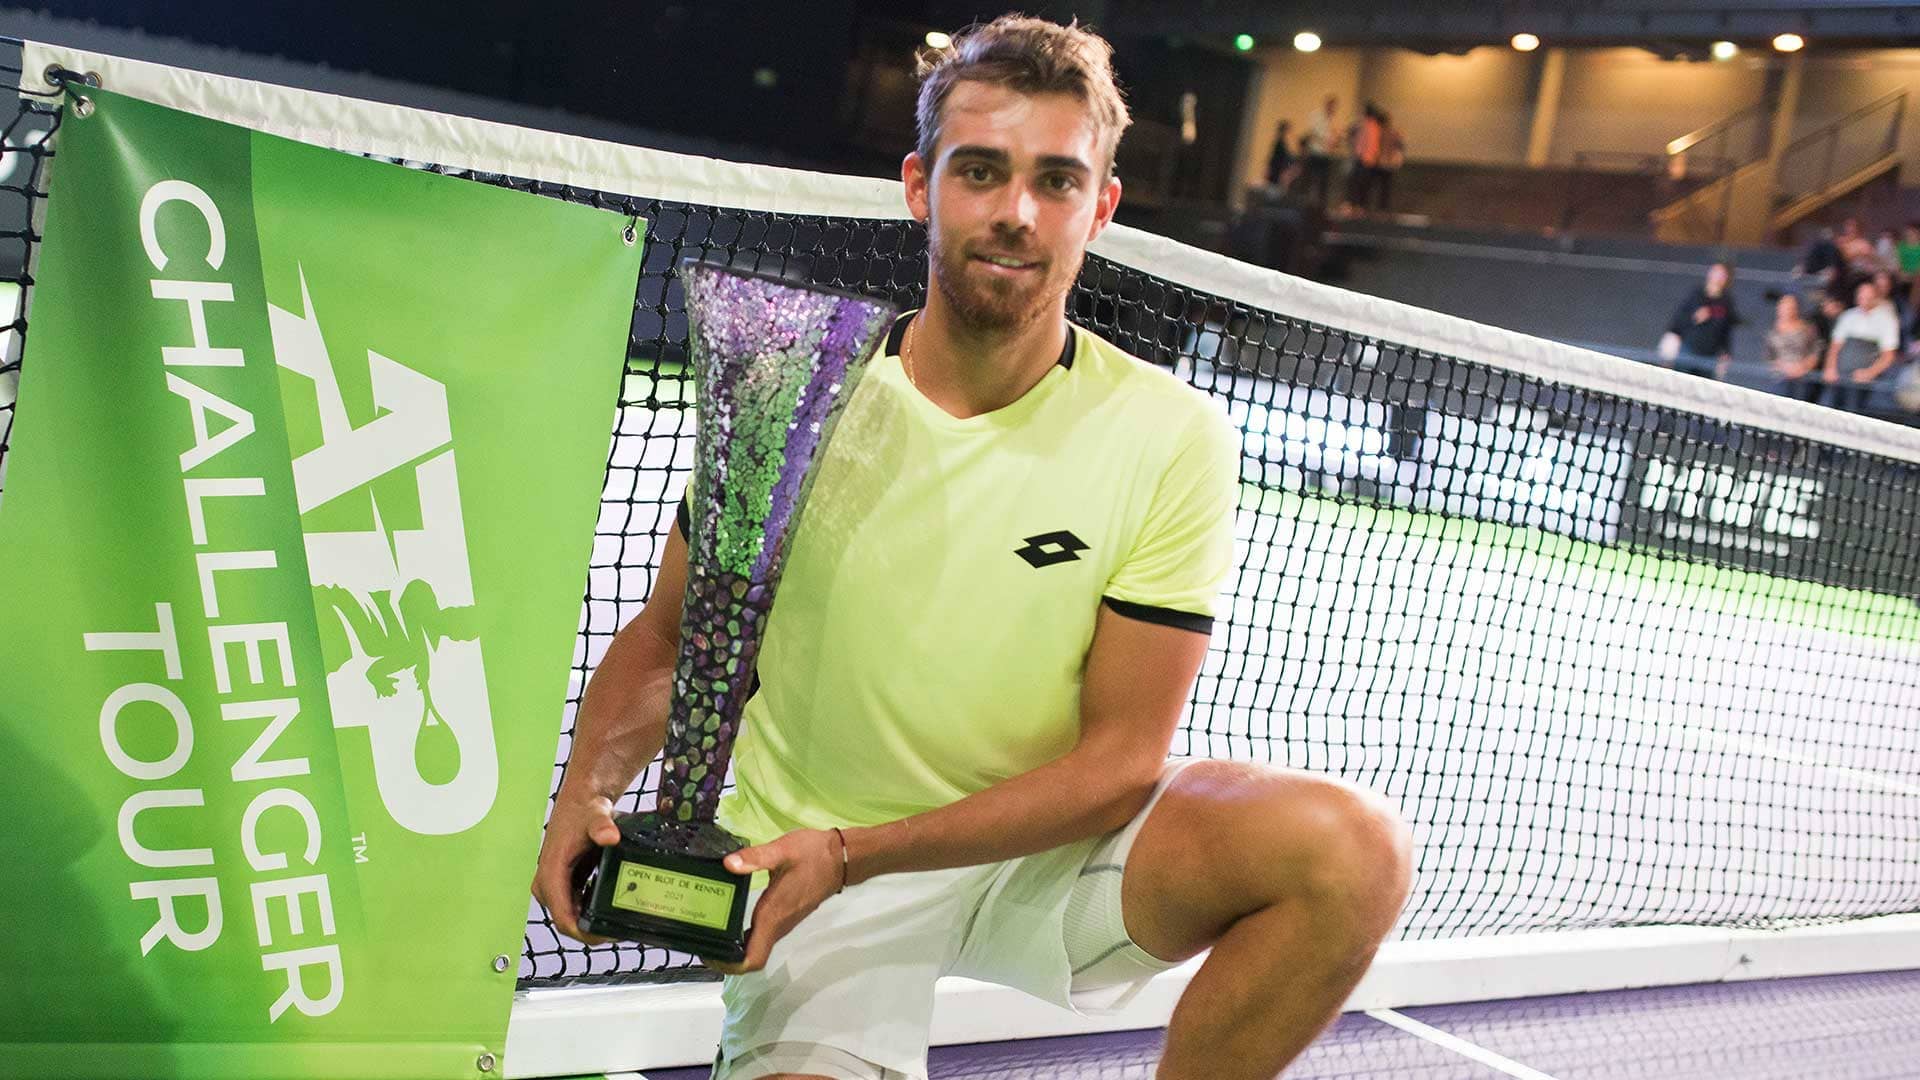 Bonzi Claims Record-Tying Sixth Challenger Title Of 2021 ATP Tour Tennis